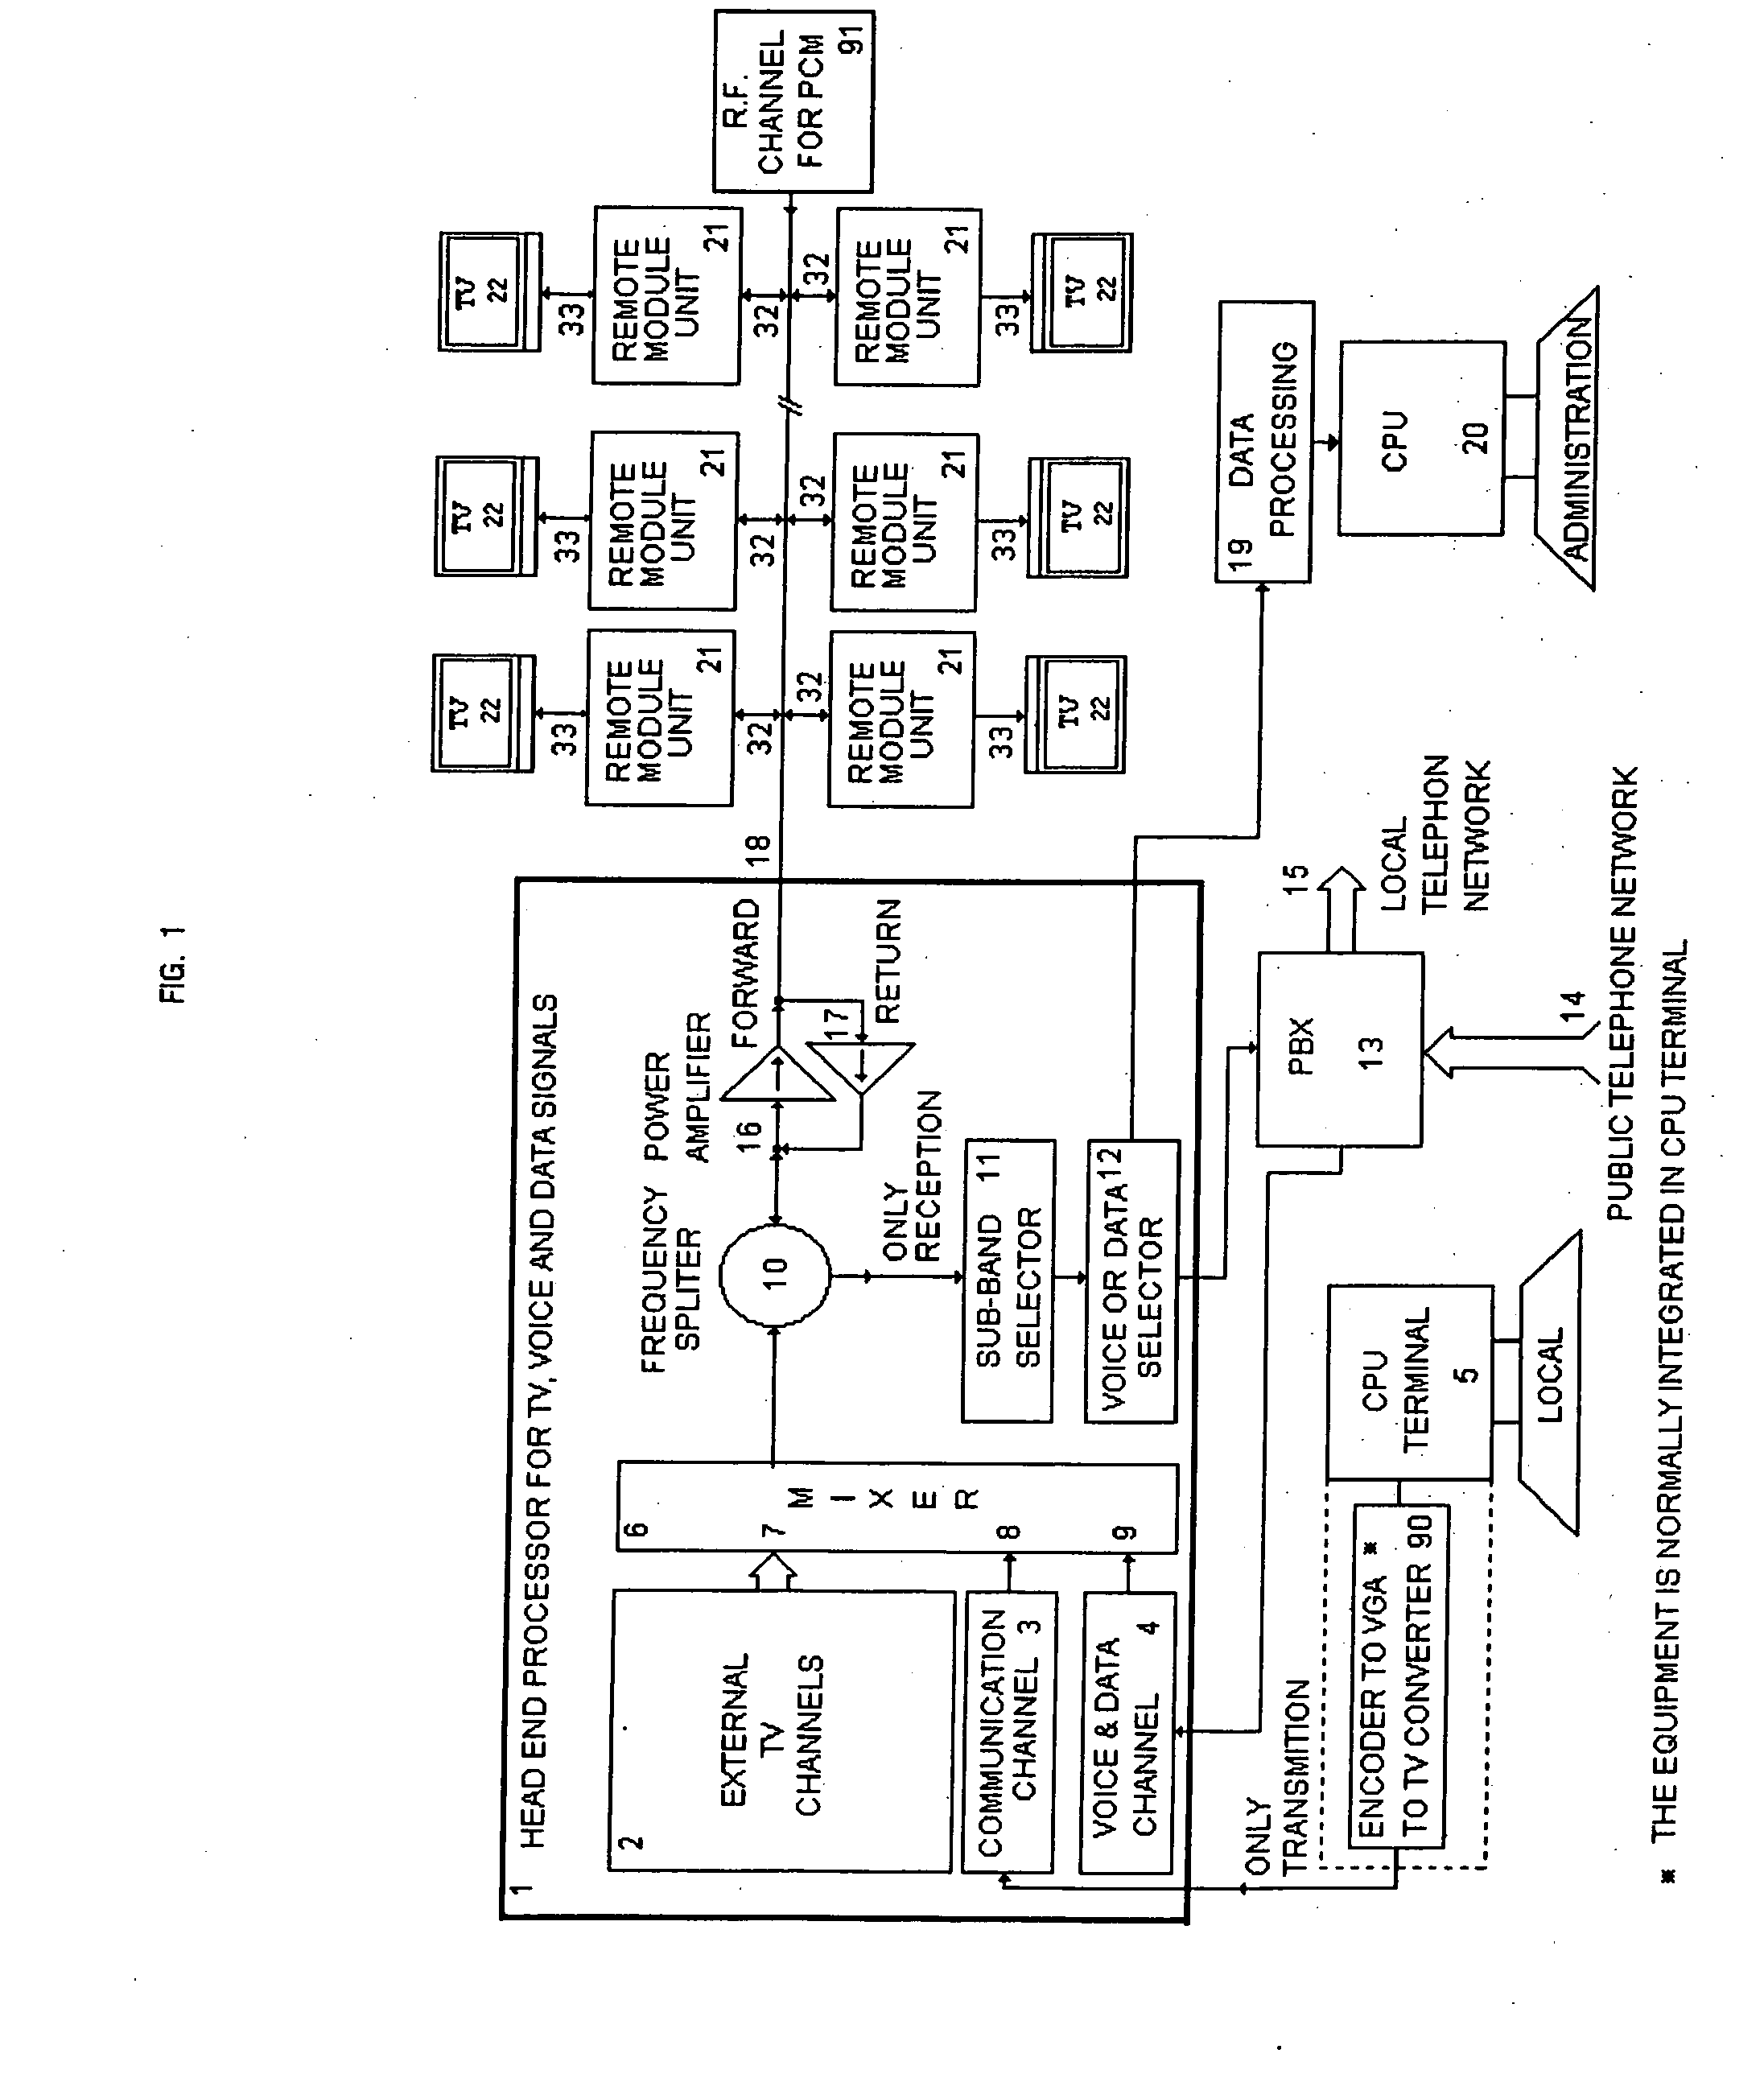 System for bi-directional voice and data communications over a video distribution network